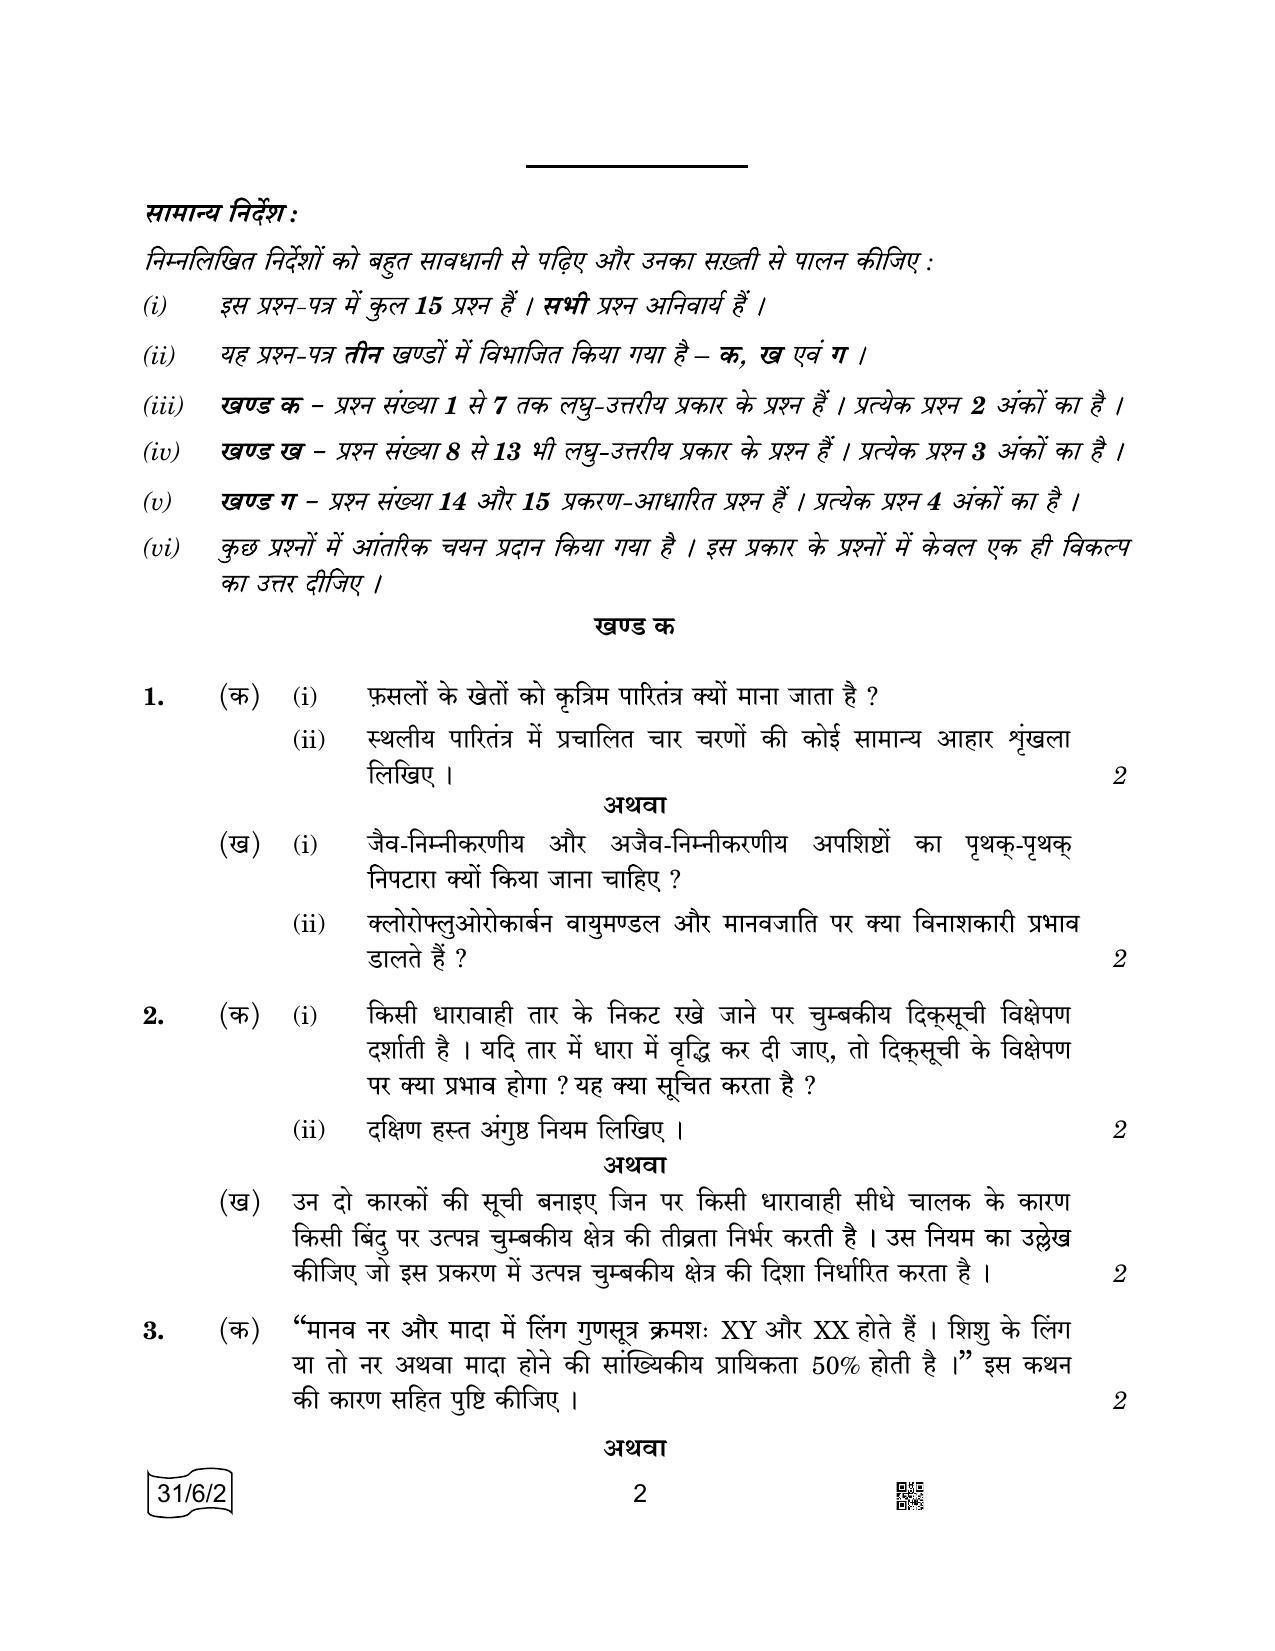 CBSE Class 10 31-6-2 SCIENCE 2022 Compartment Question Paper - Page 2